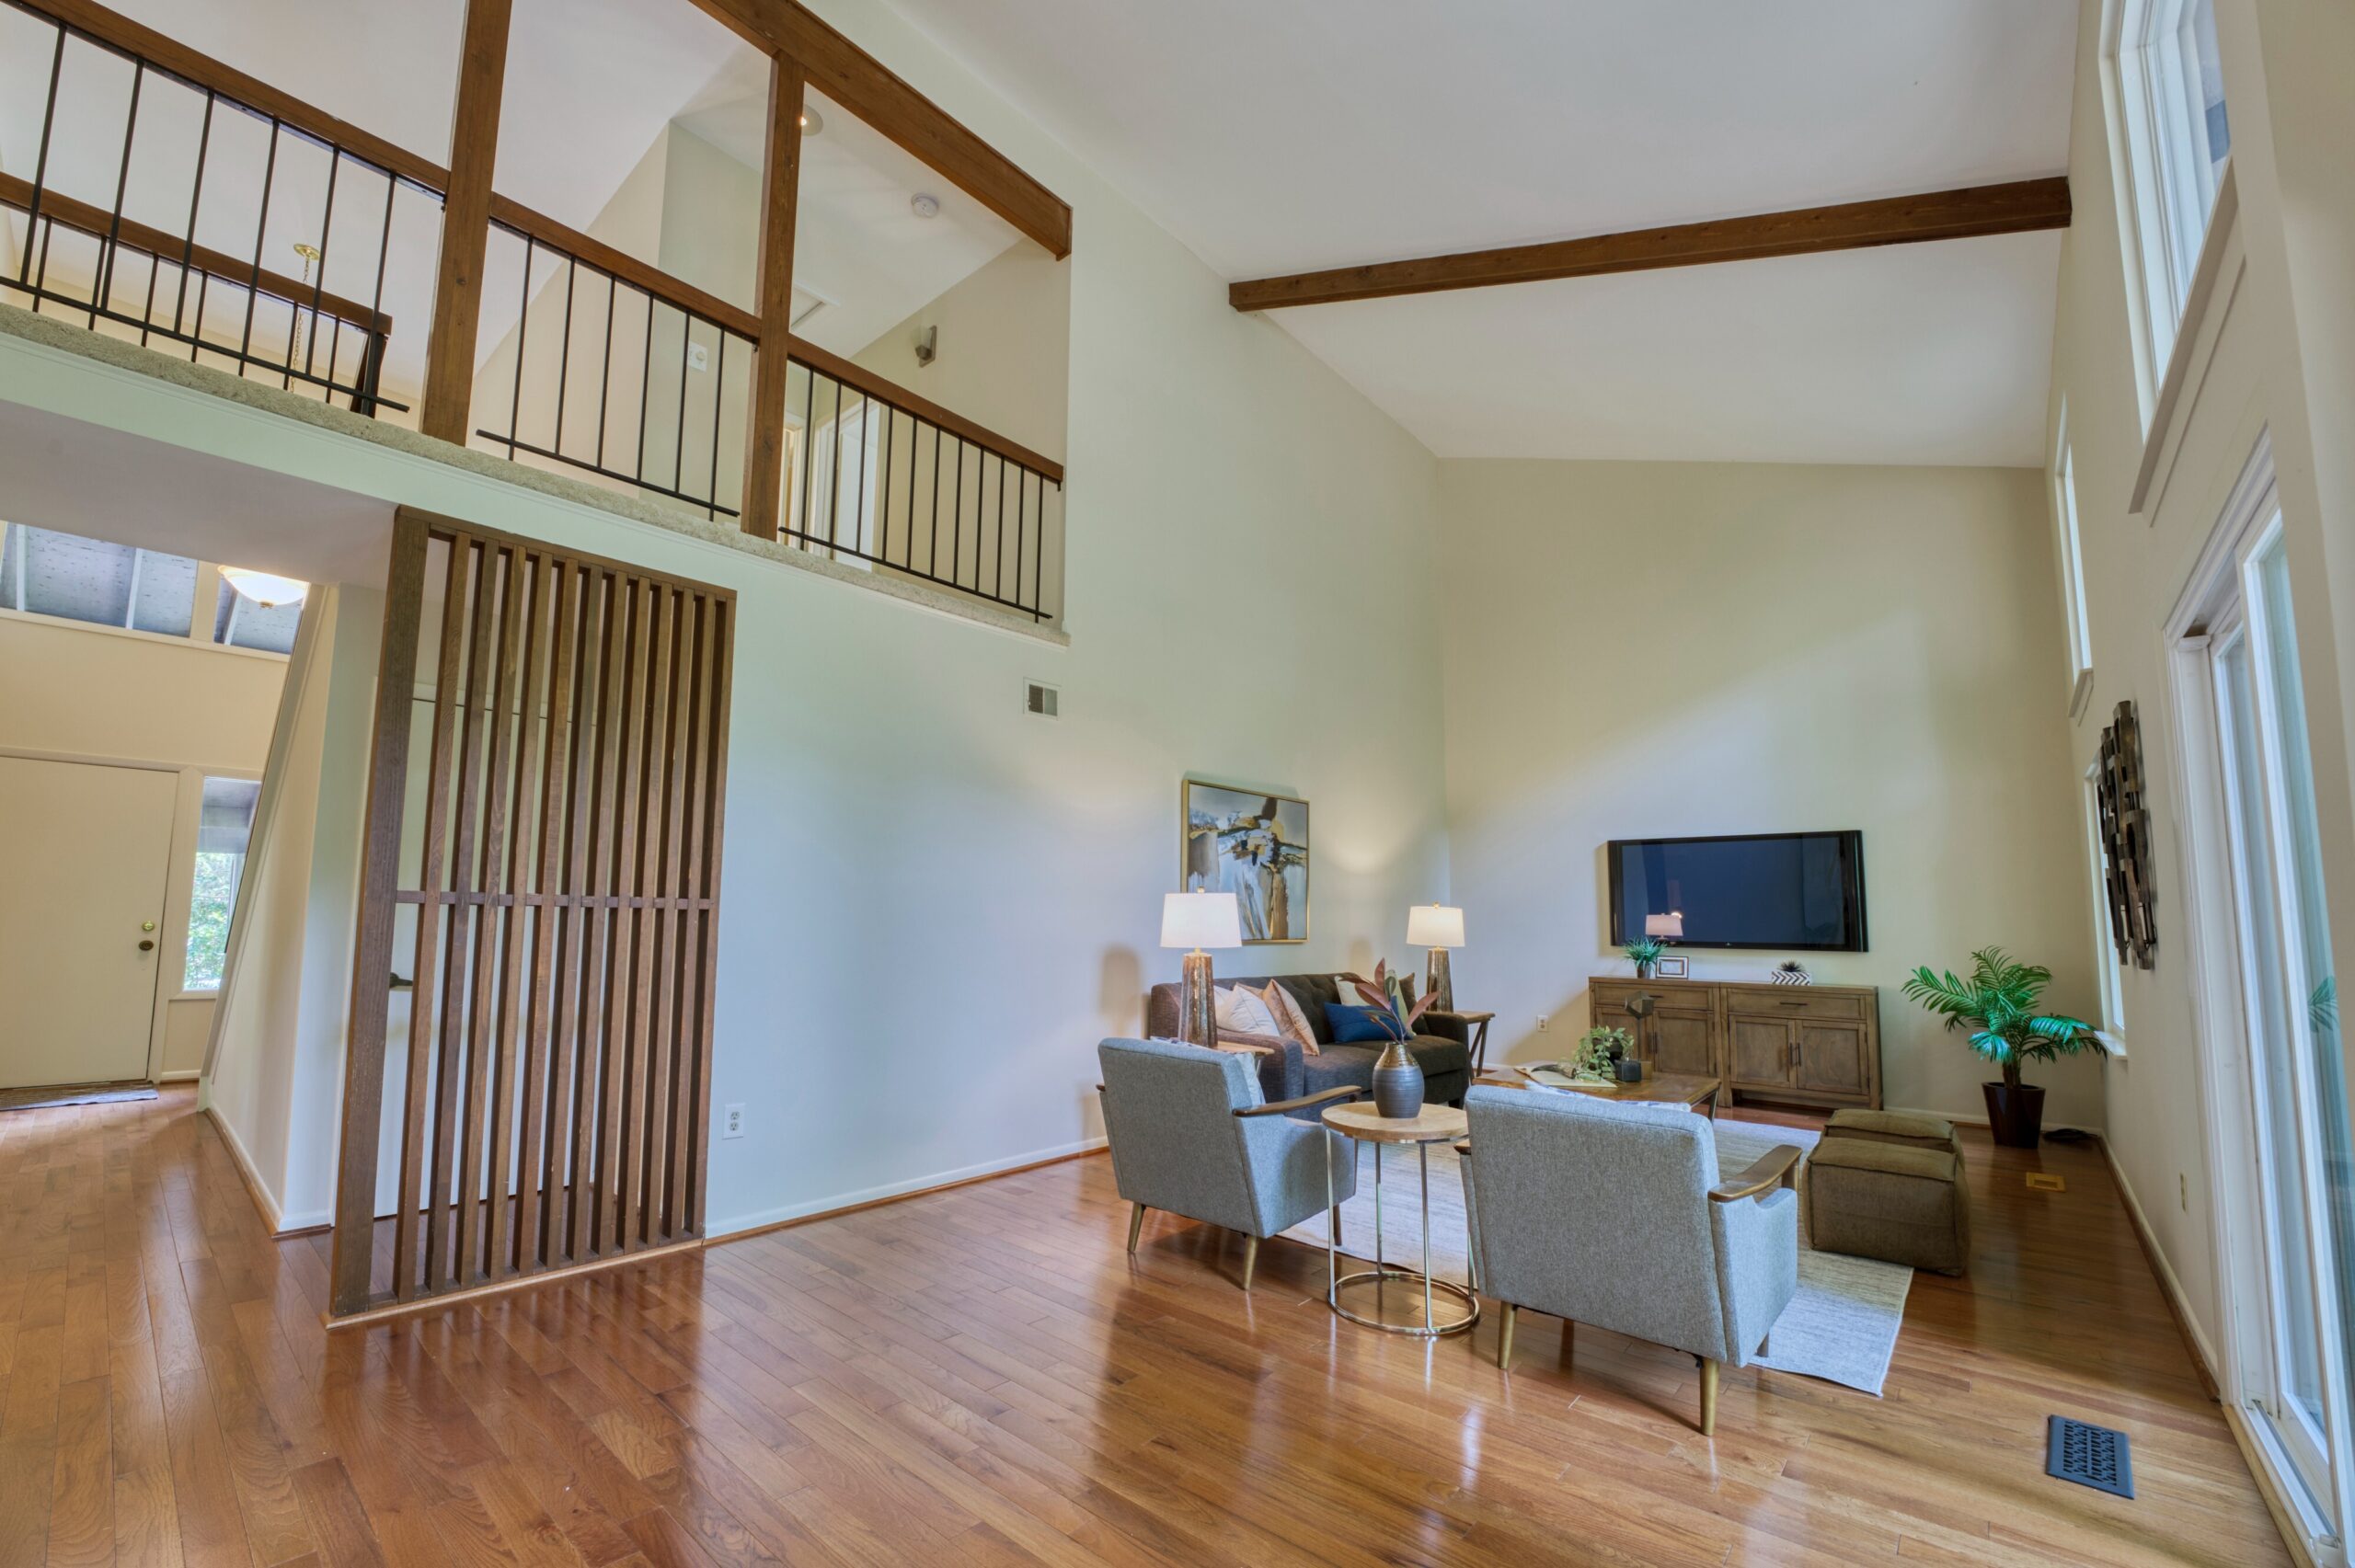 Professional interior photo of 5222 Bradfield Dr in Burke, Virginia - showing the main living room with vaulted ceilings and hardwood floors, wood accents and a wall of windows